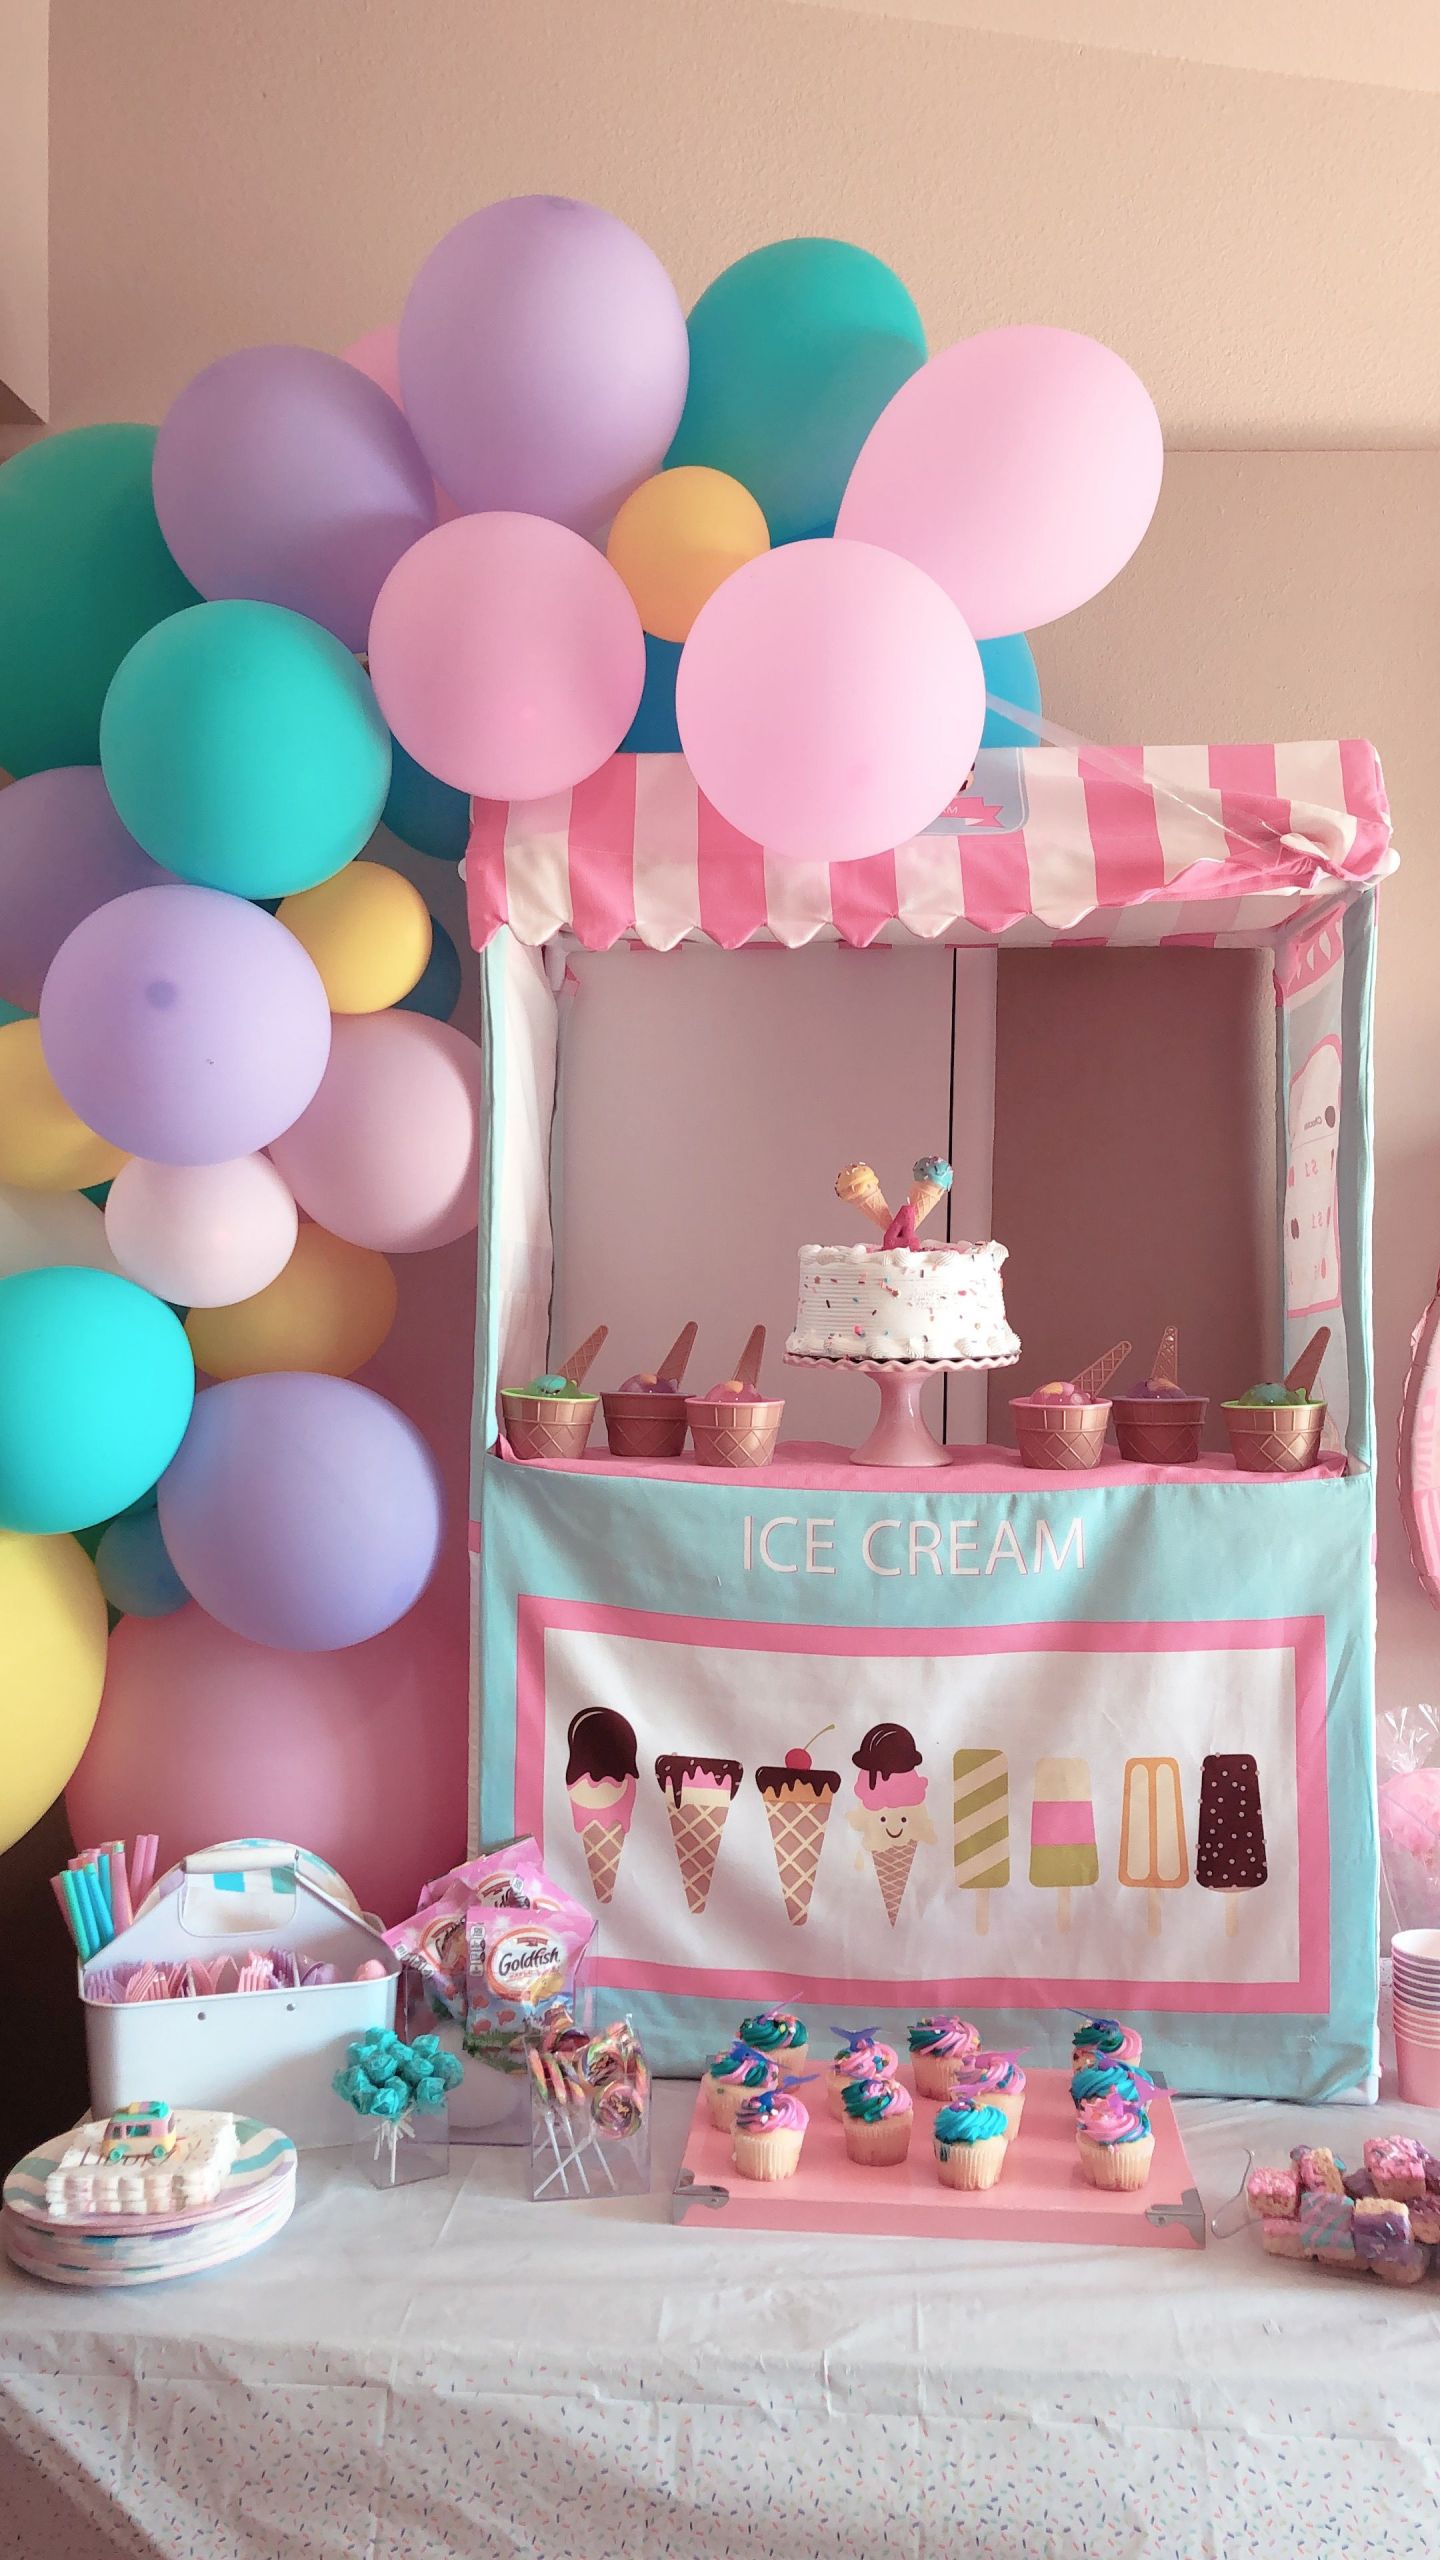 Birthday Party Ideas For 4 Year Old Girl
 Ice cream birthday party for my 4 year old in 2019